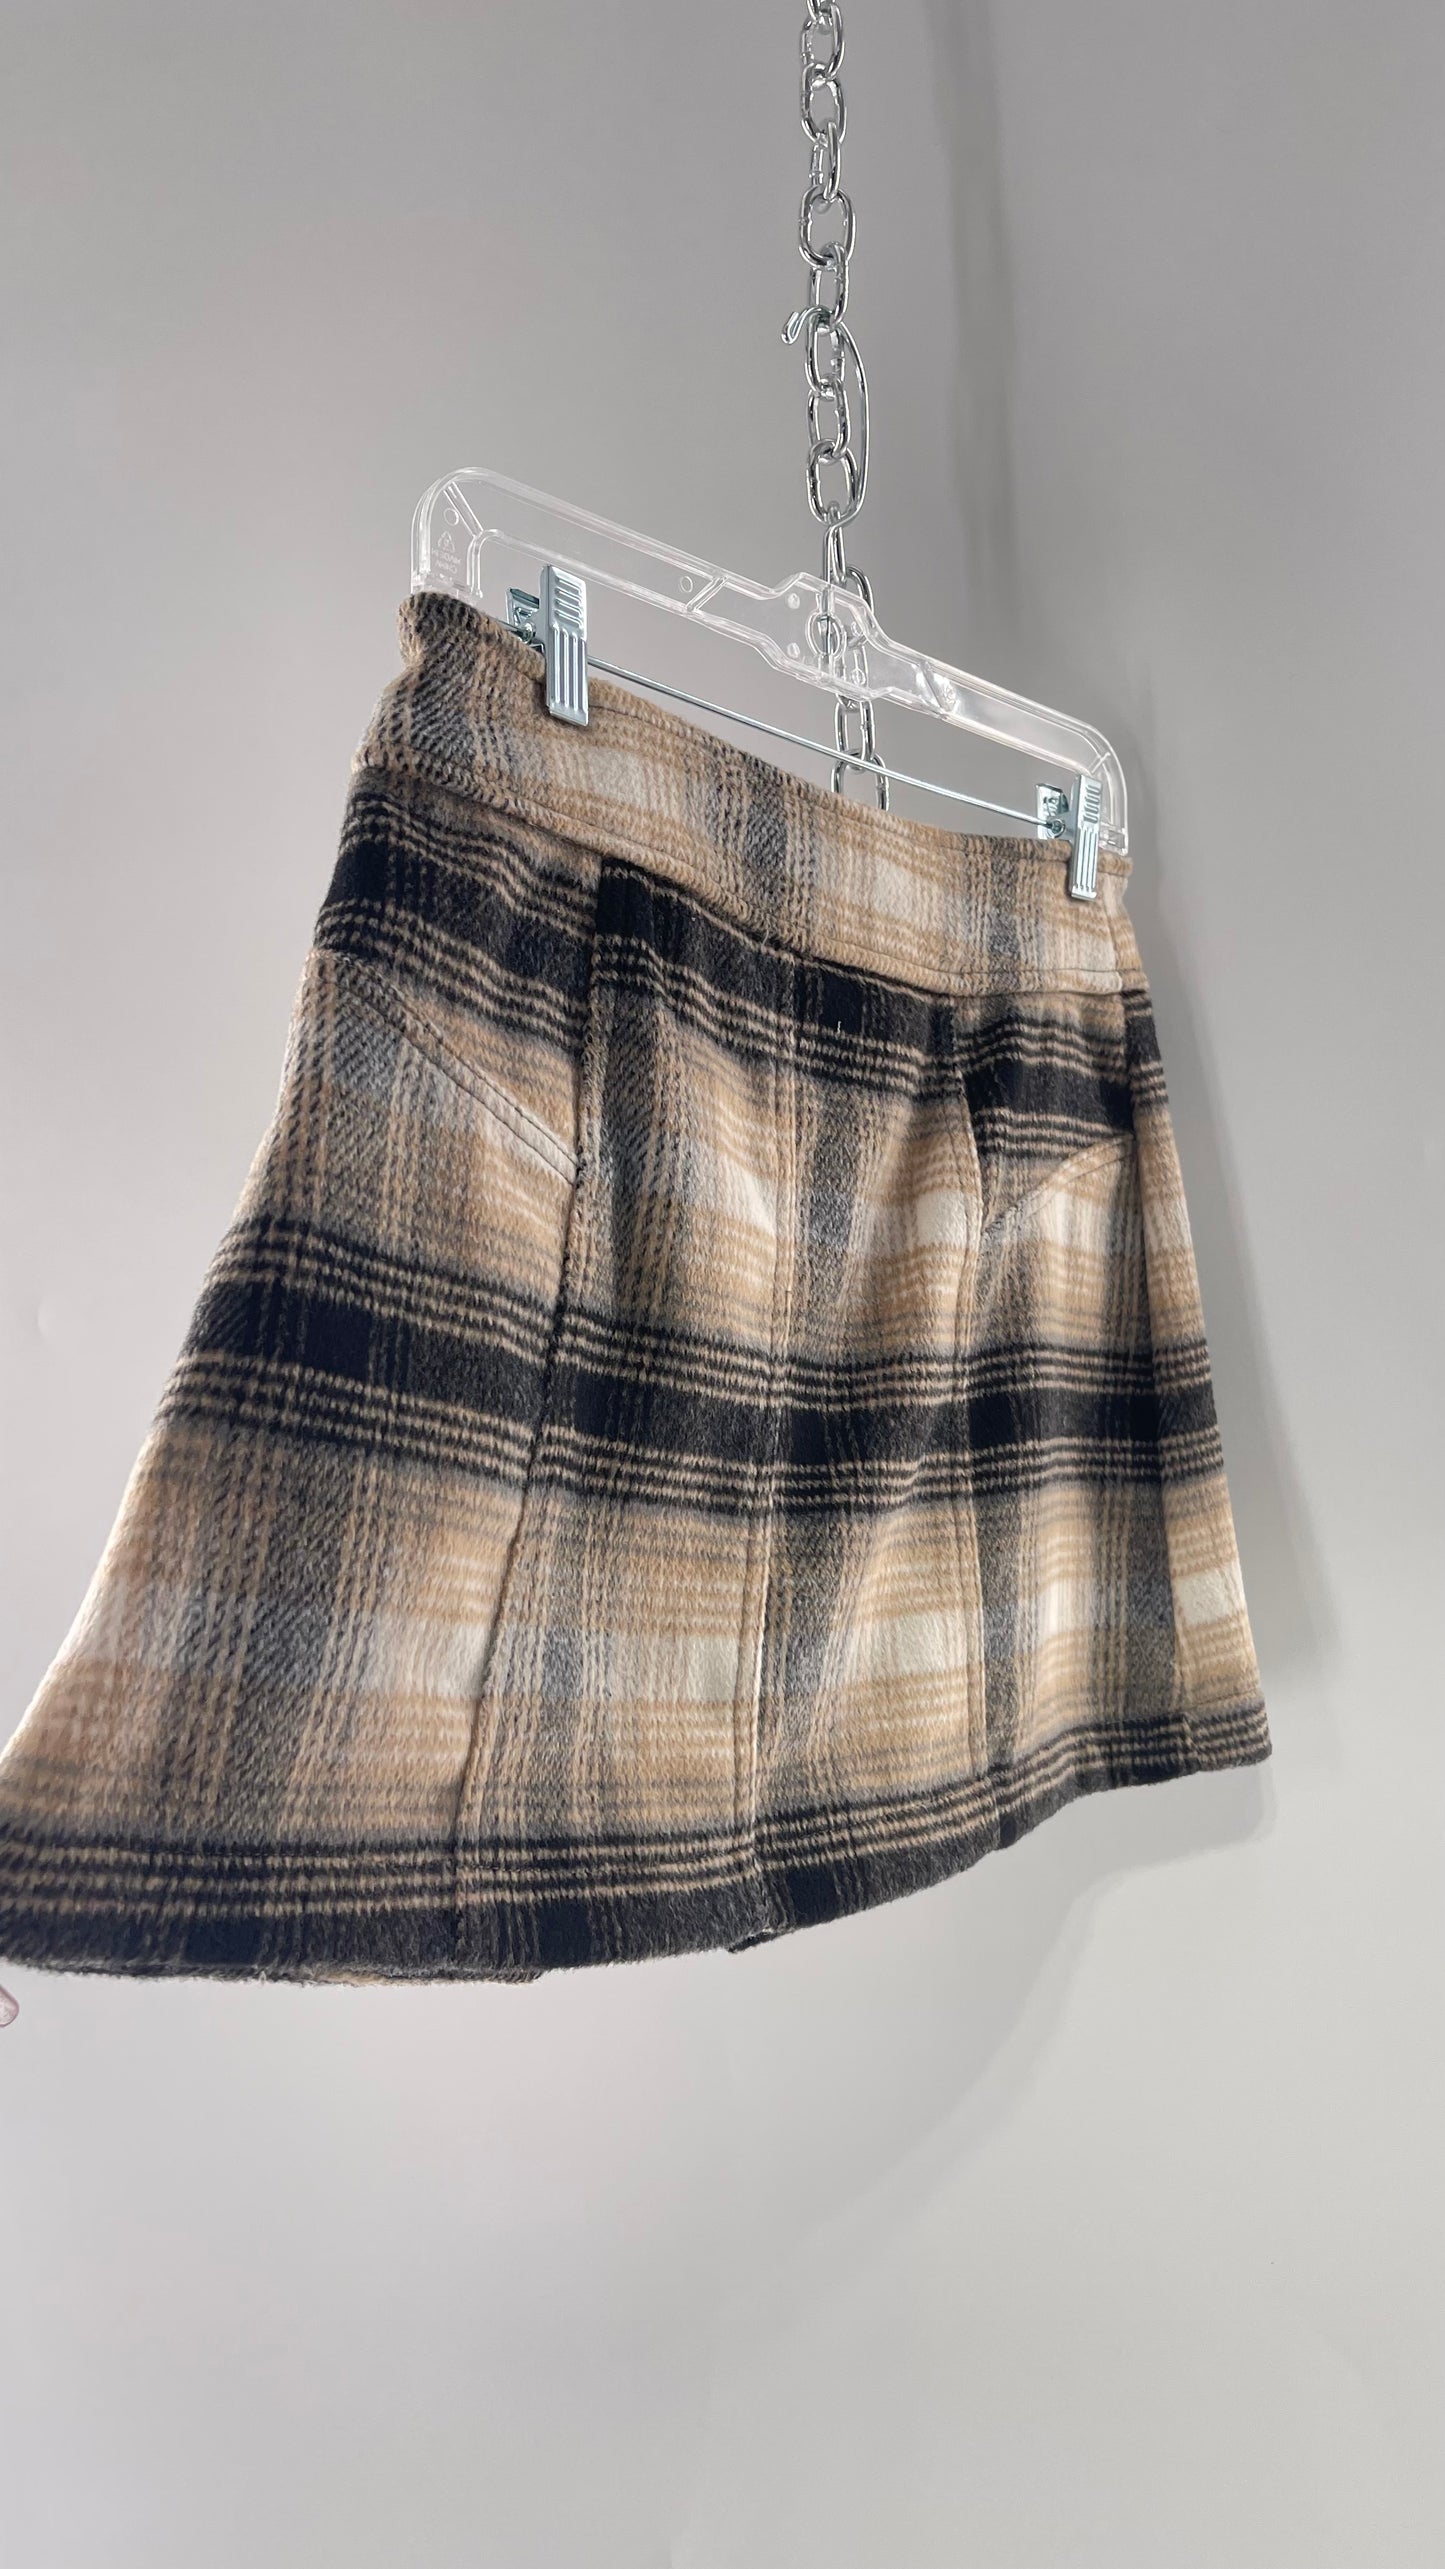 Free People Plaid Beige Gray Soft Mini Skirt with Side Slit and Built in Grommet Belt